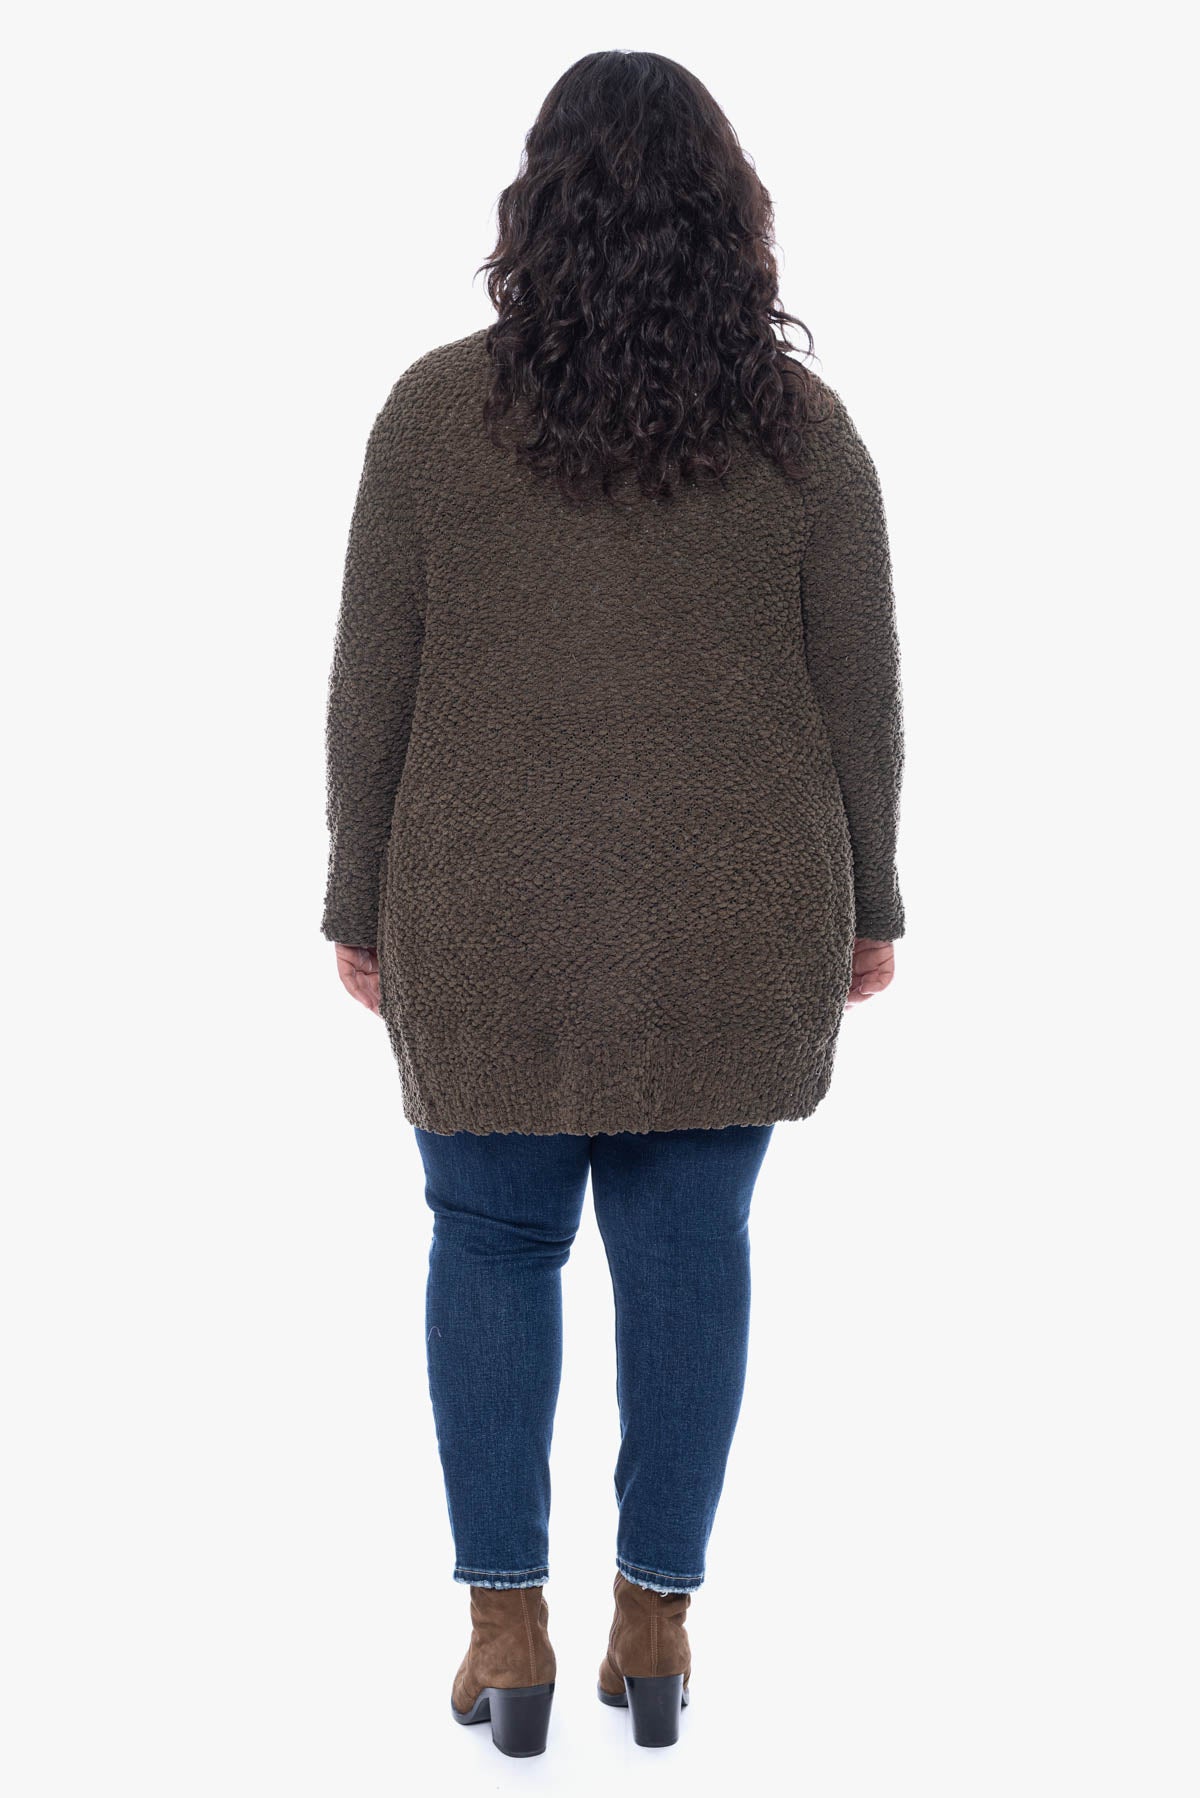 VERENA knitted sweater